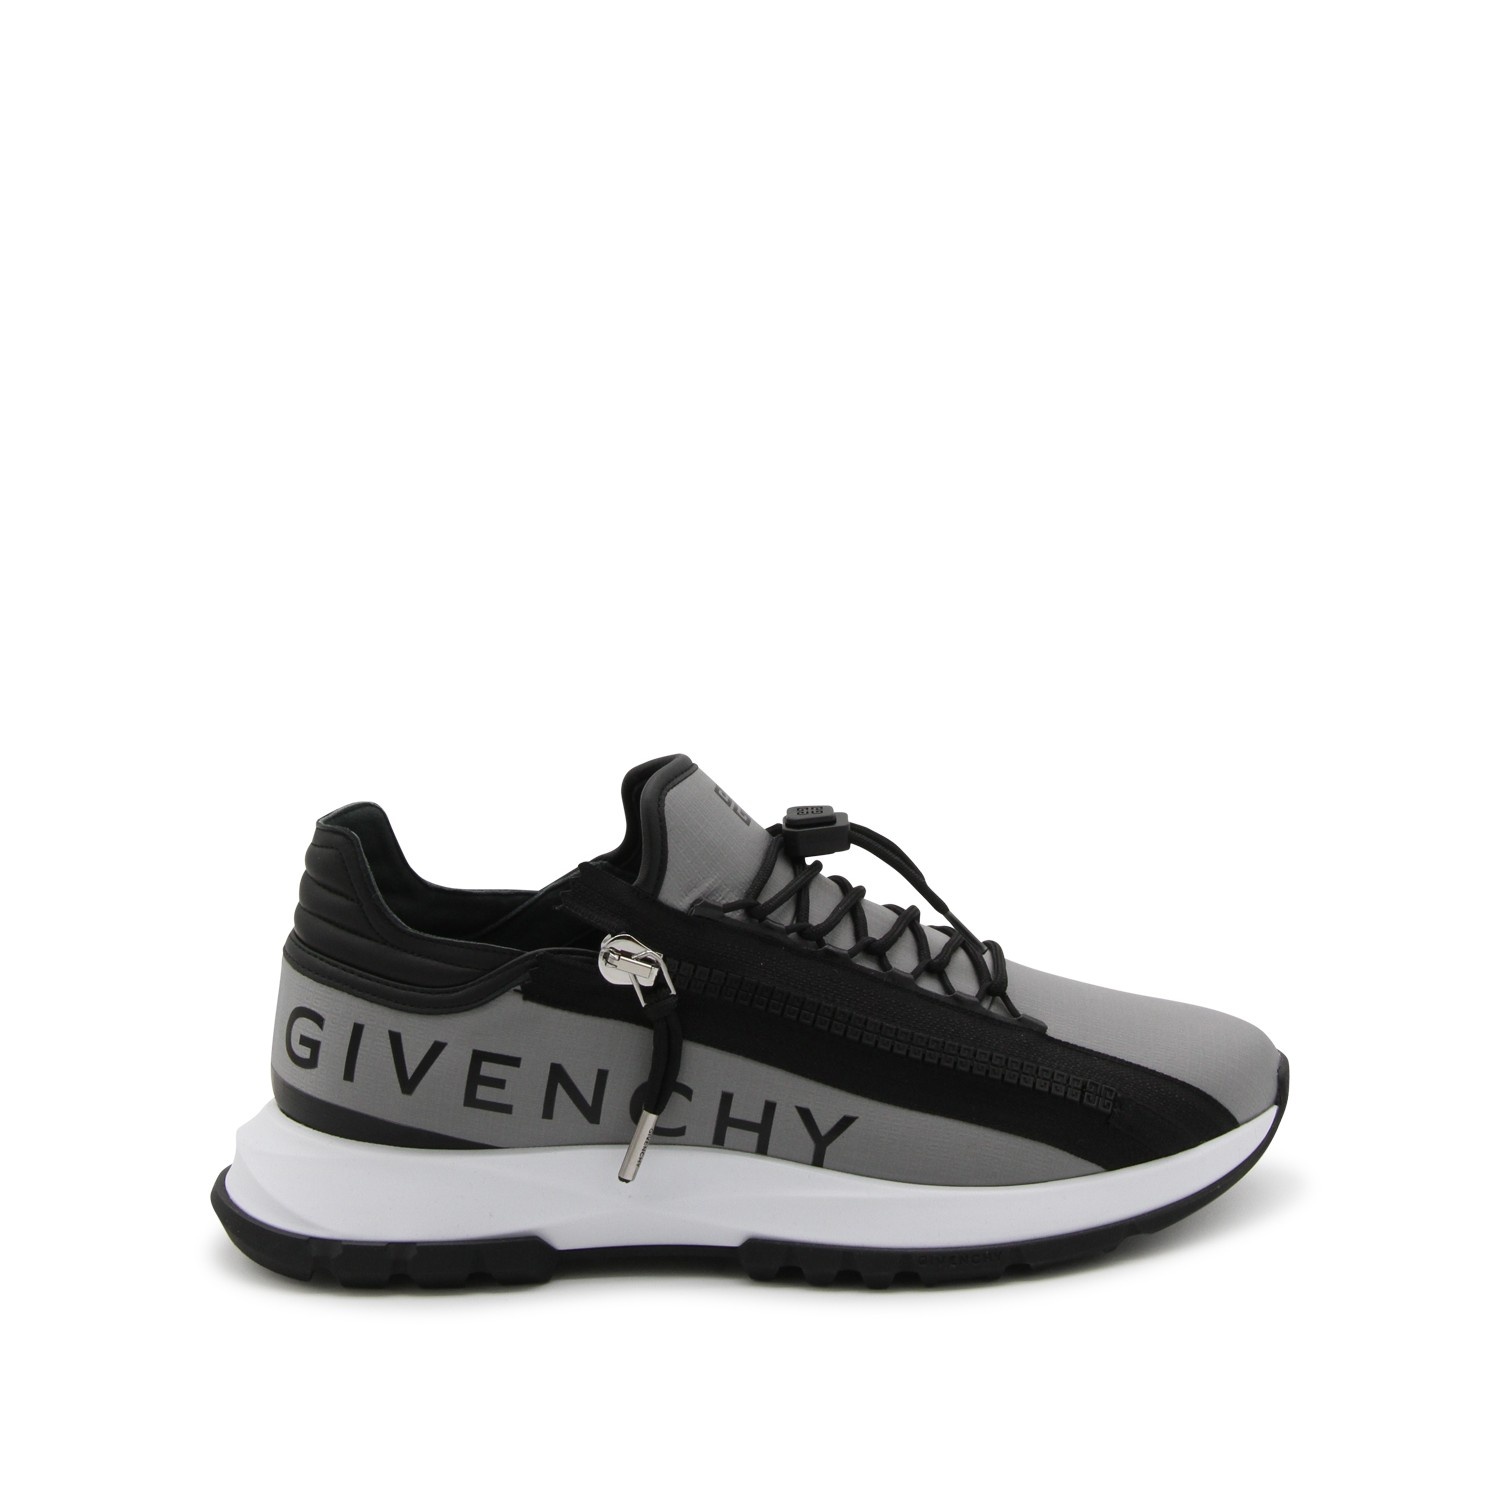 BLACK AND GREY SPECTRE SNEAKERS - 1